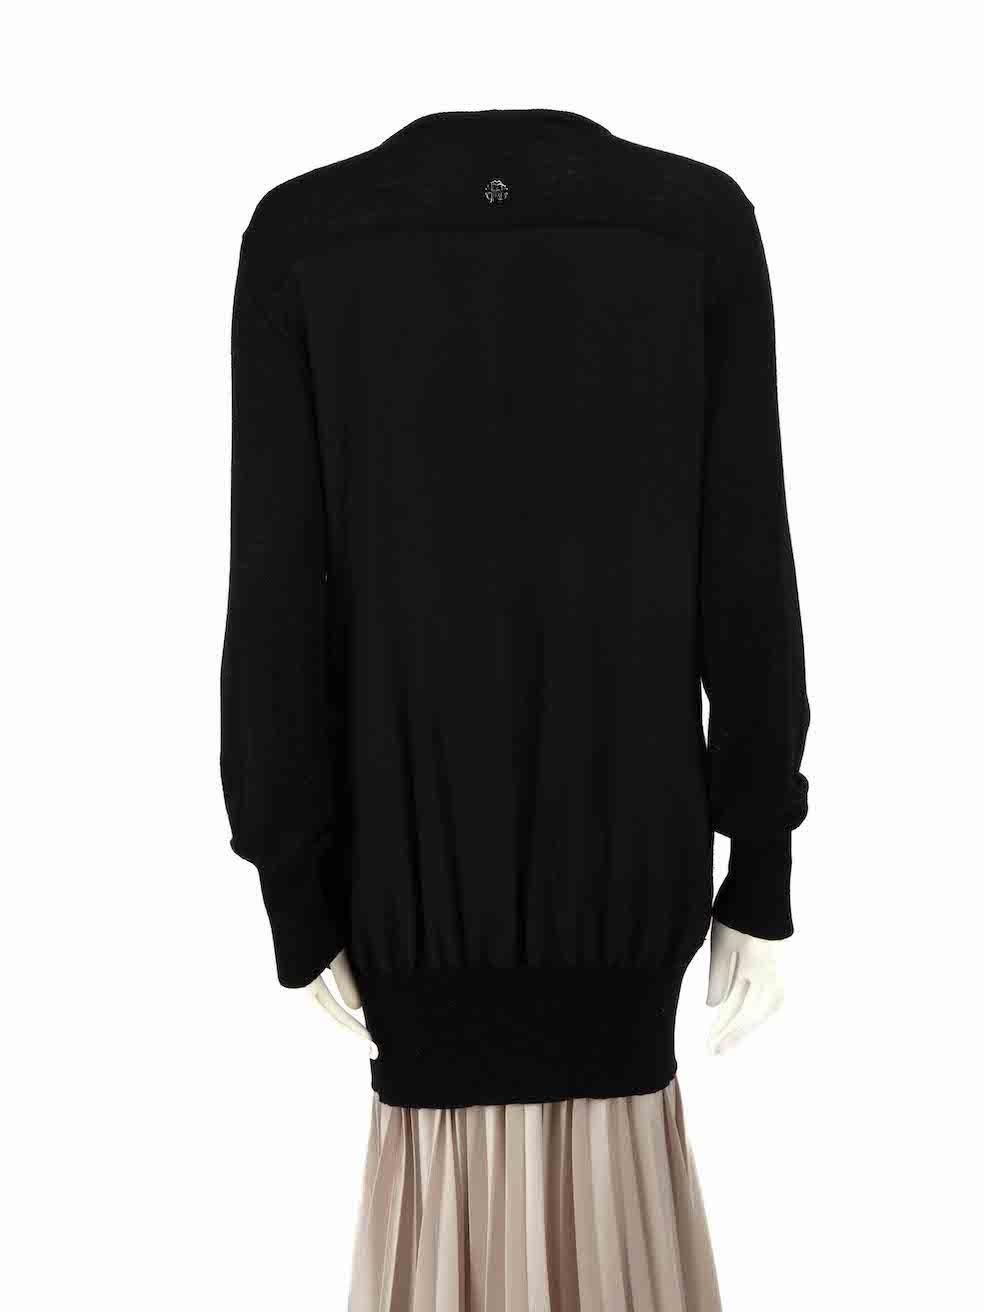 Roberto Cavalli Black Wool Knit Silk Panel Jumper Size XXL In Good Condition For Sale In London, GB